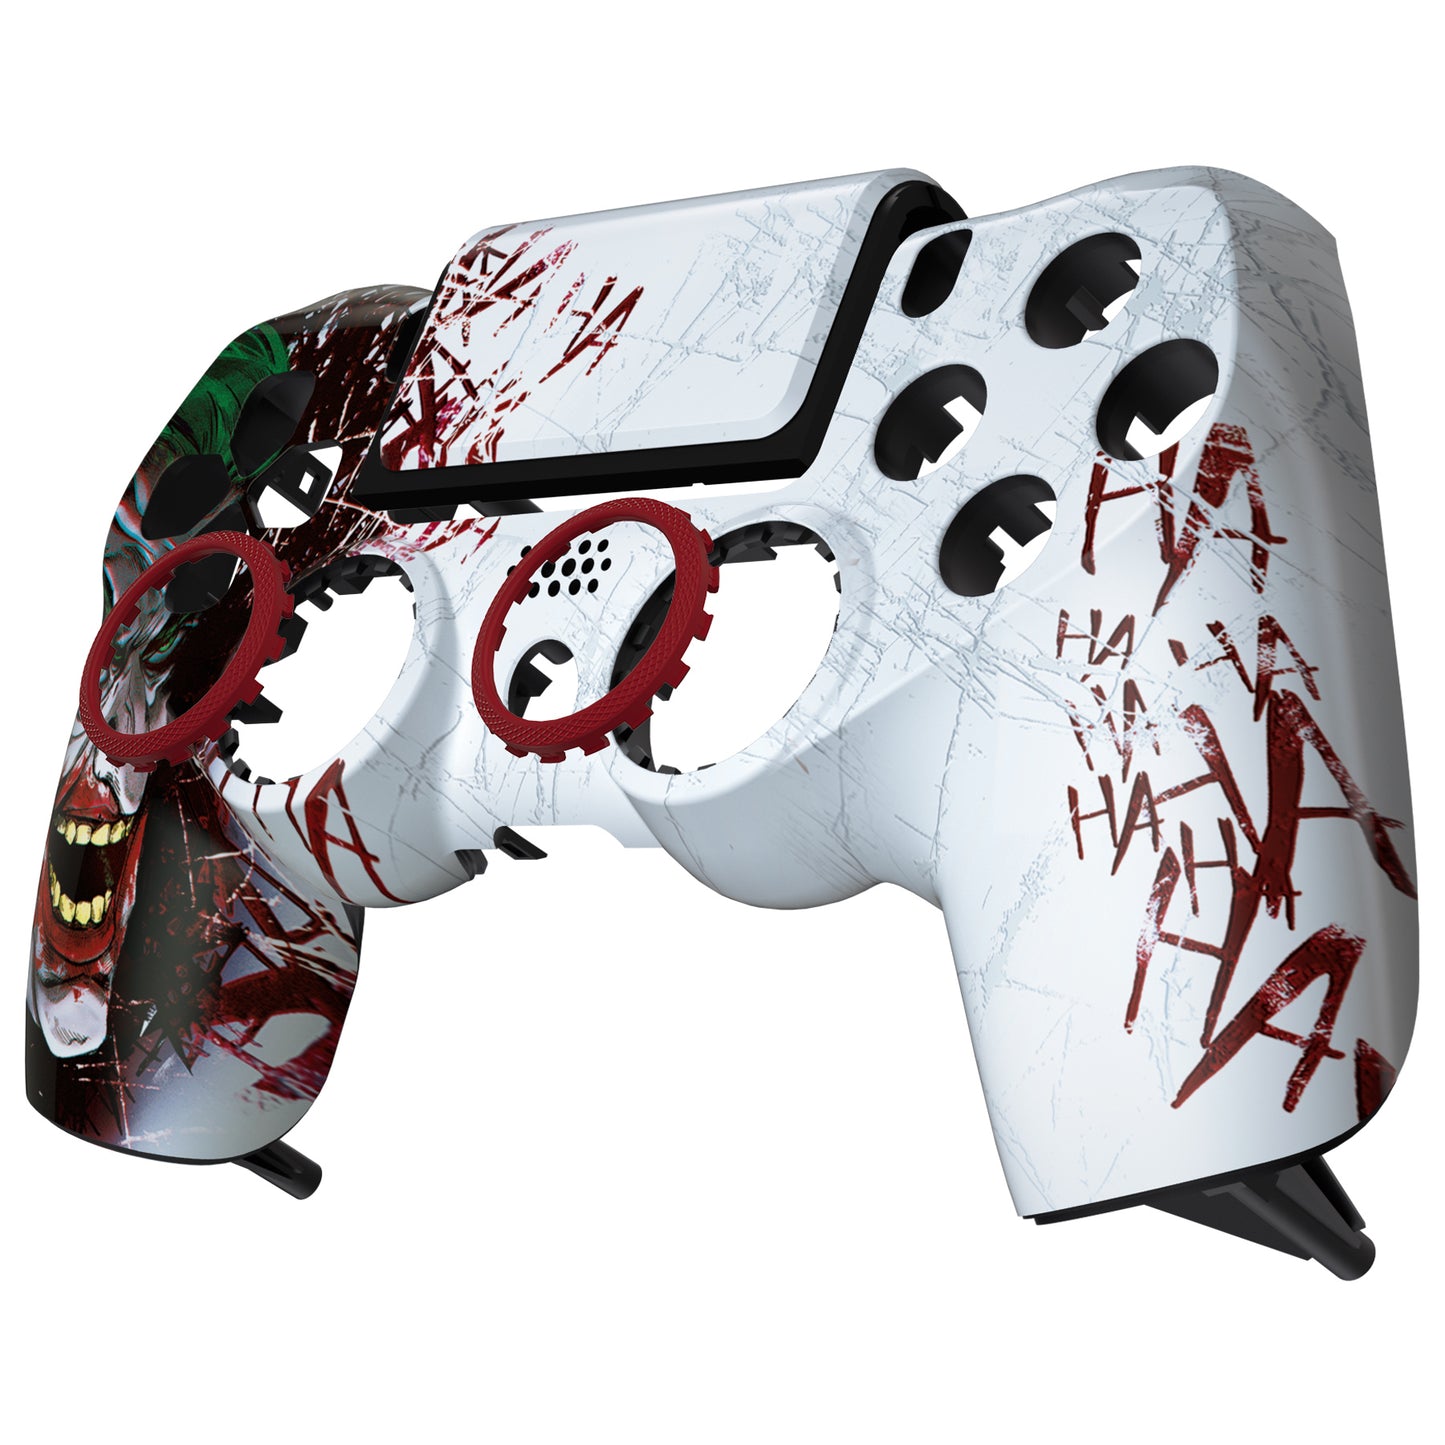 eXtremeRate Ghost Redesigned Front Housing Shell with Touch Pad Compatible with PS4 Slim Pro Controller JDM-040/050/055 - Clown HAHAHA eXtremeRate